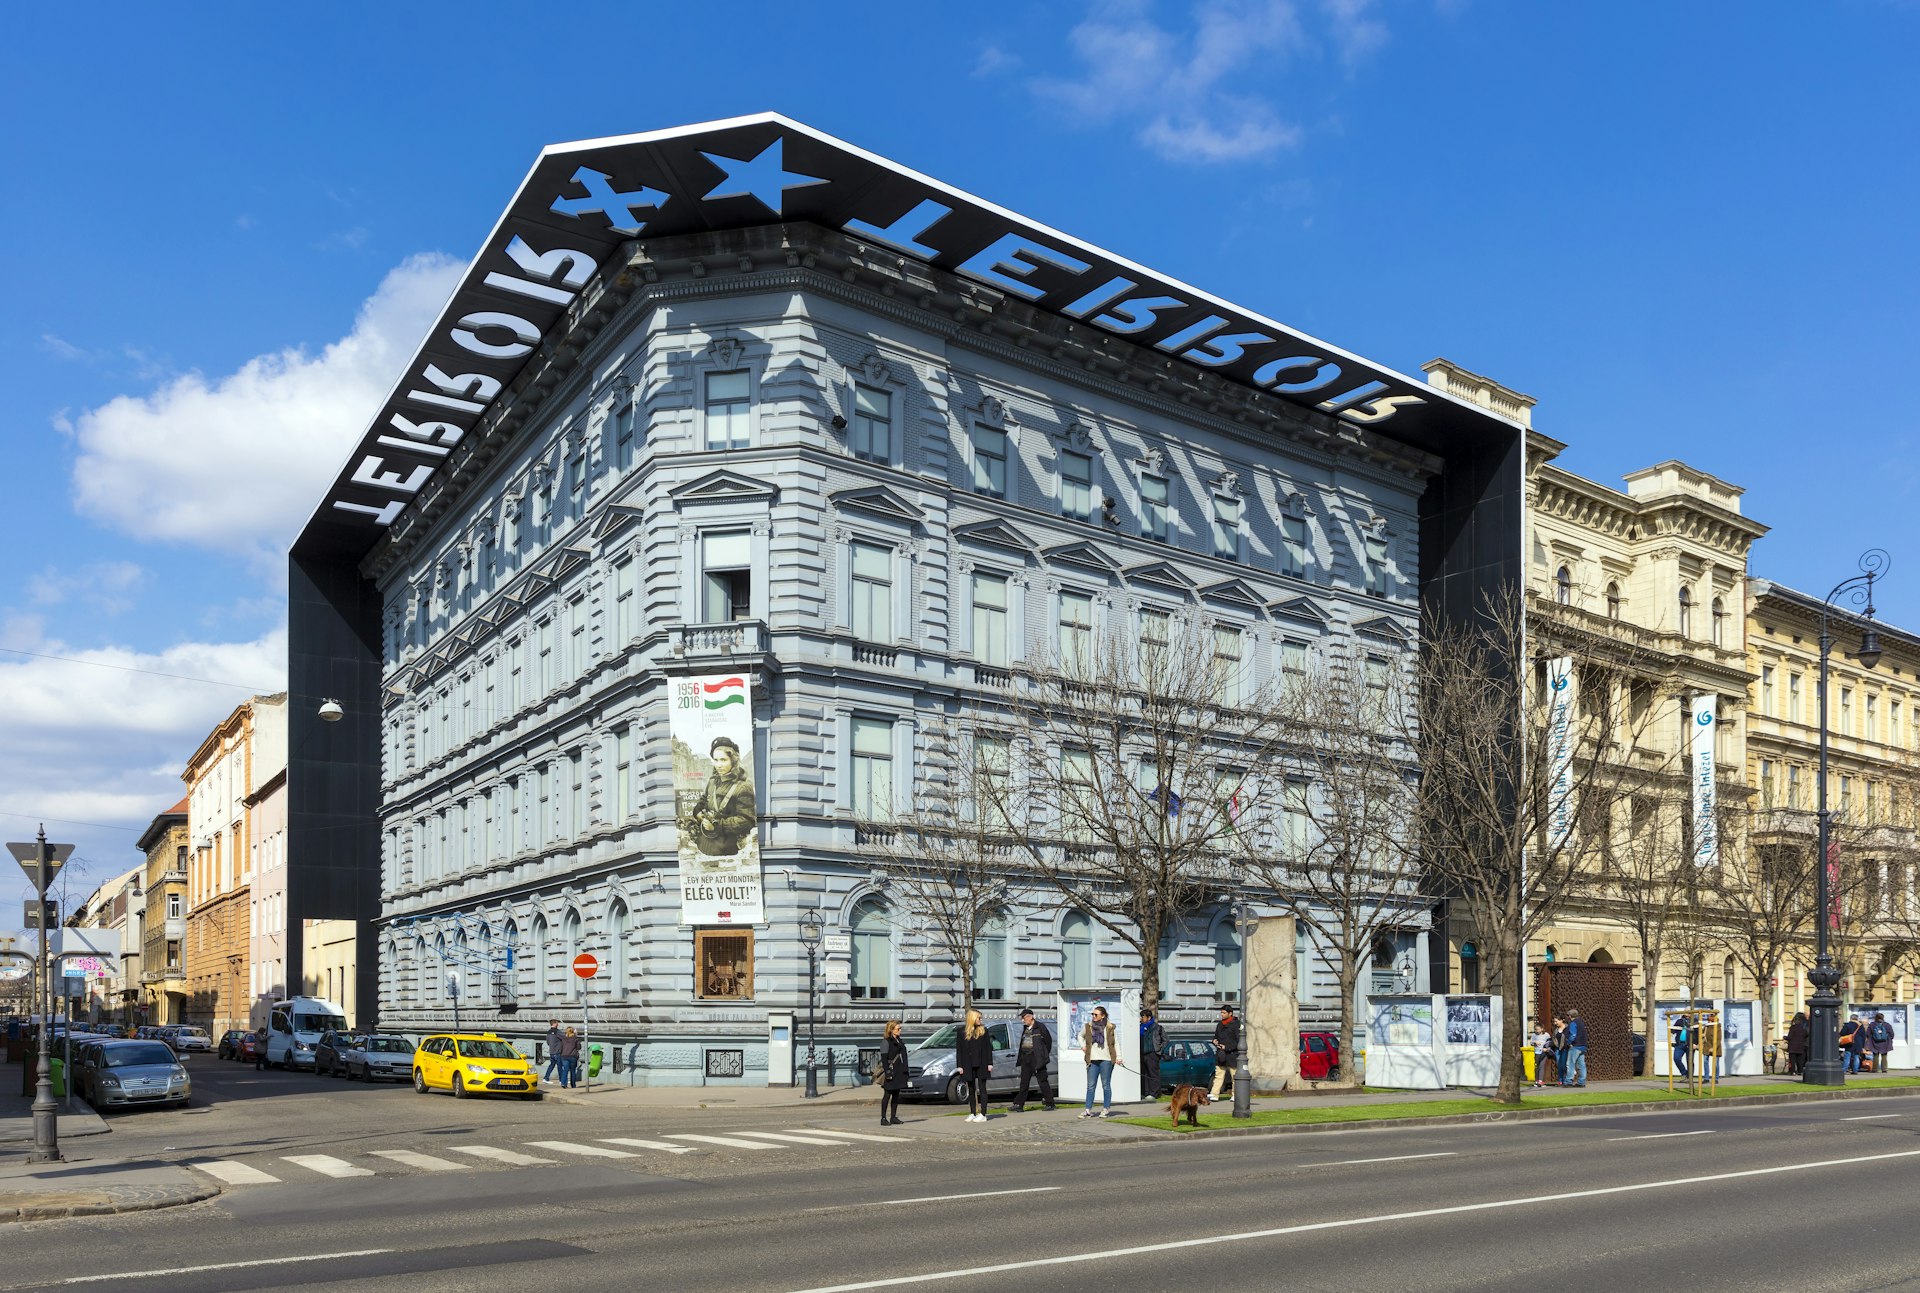 Facade of the House of Terror Museum. The museum opened 13 years ago to present the bloody periods of Hungarian history.